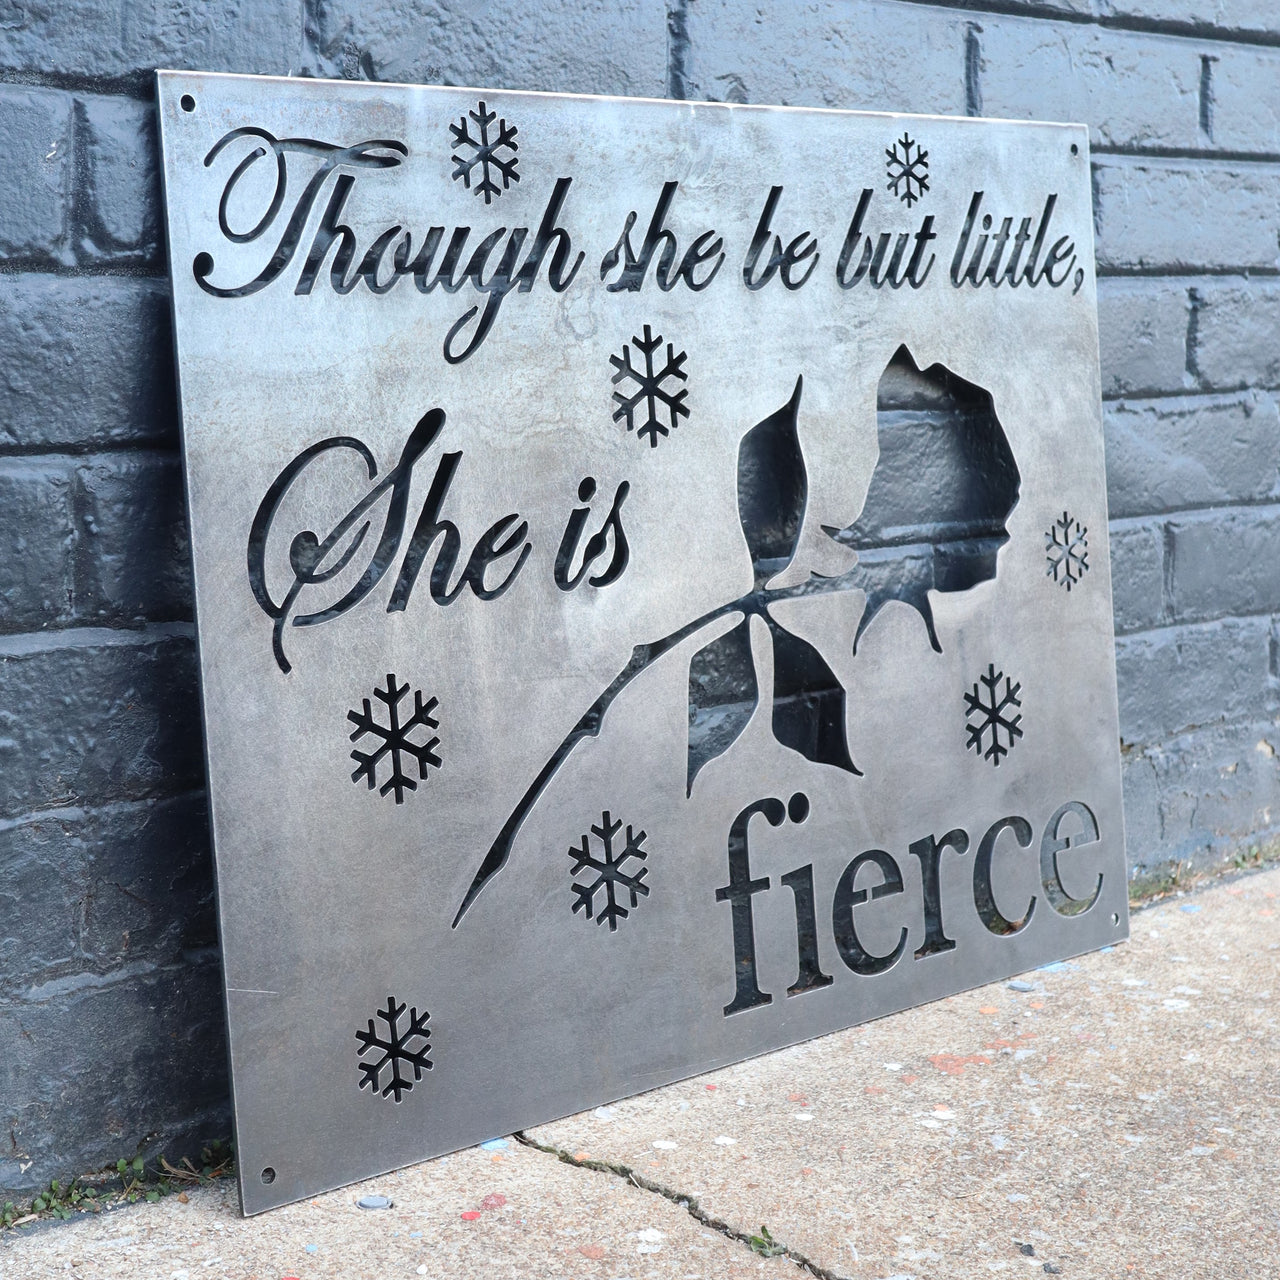 Though She Be But Little, She is Fierce - Metal Nursery Sign for a Baby Girl - Shakespeare Quote from A Midsummer Night's Dream